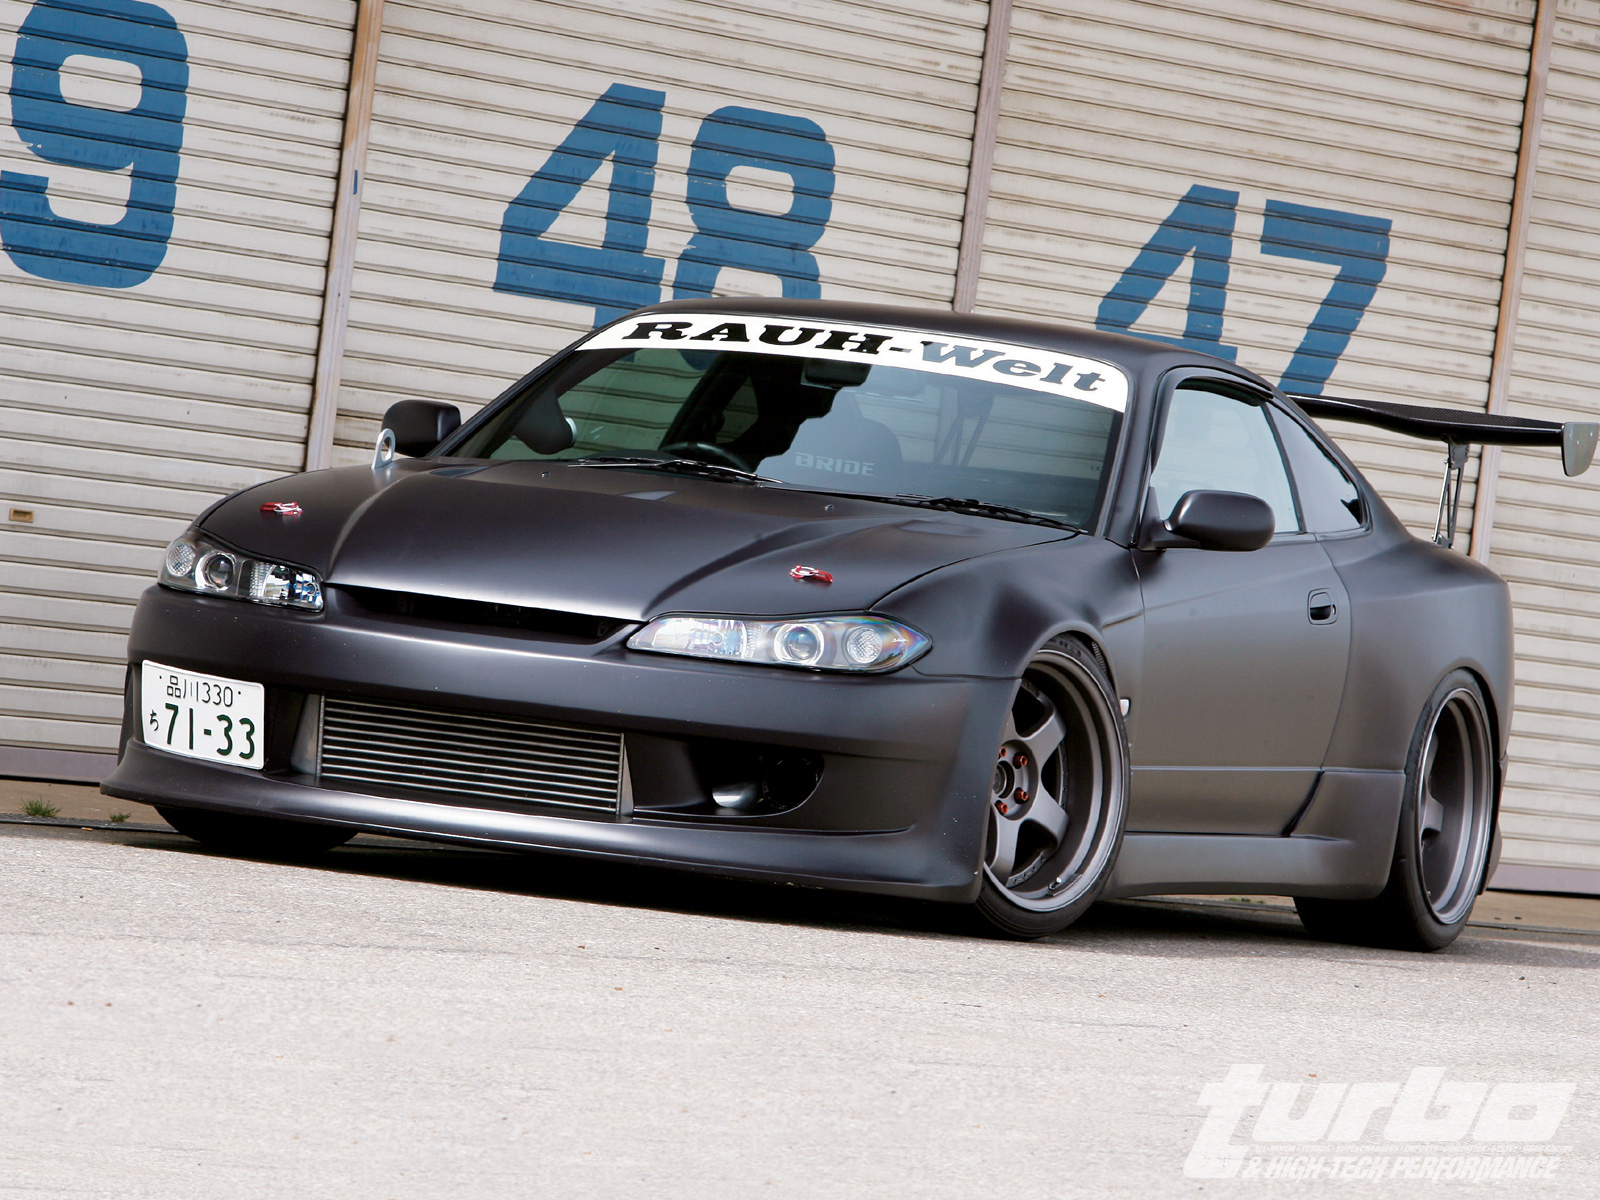 Planet Octane Customs Nissan Silvia of The Week 24: "Intoxicating ...